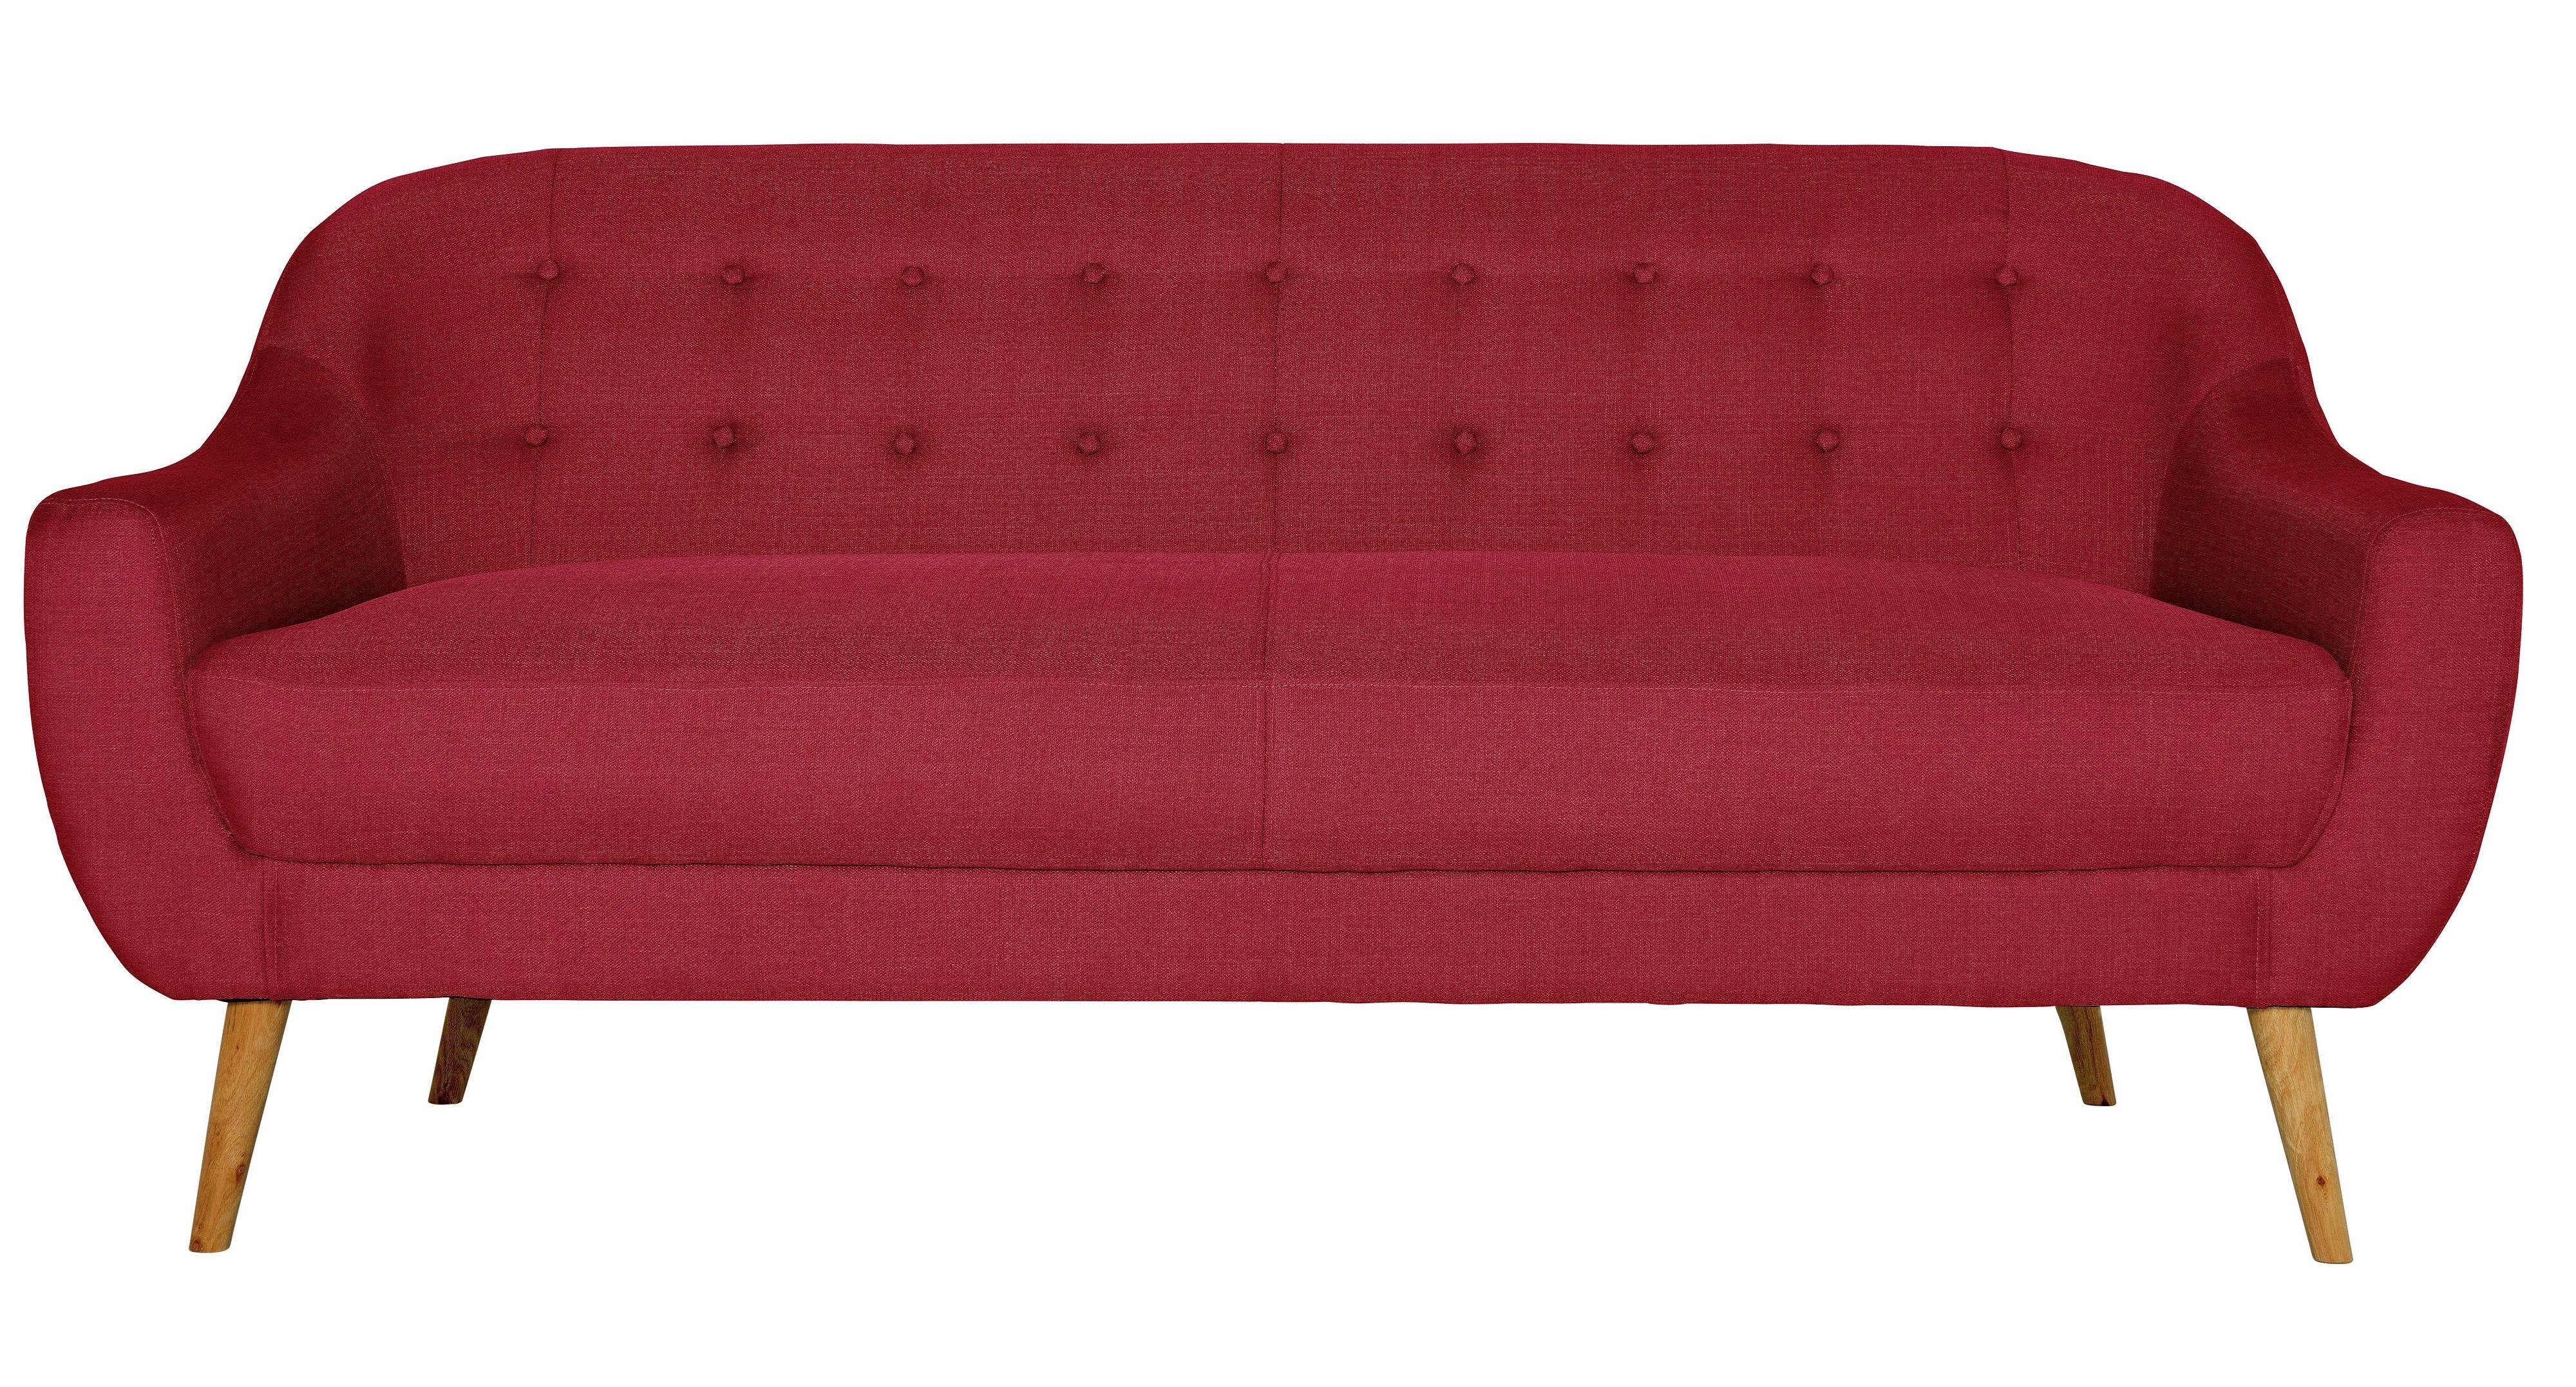 leather shiner for sofa